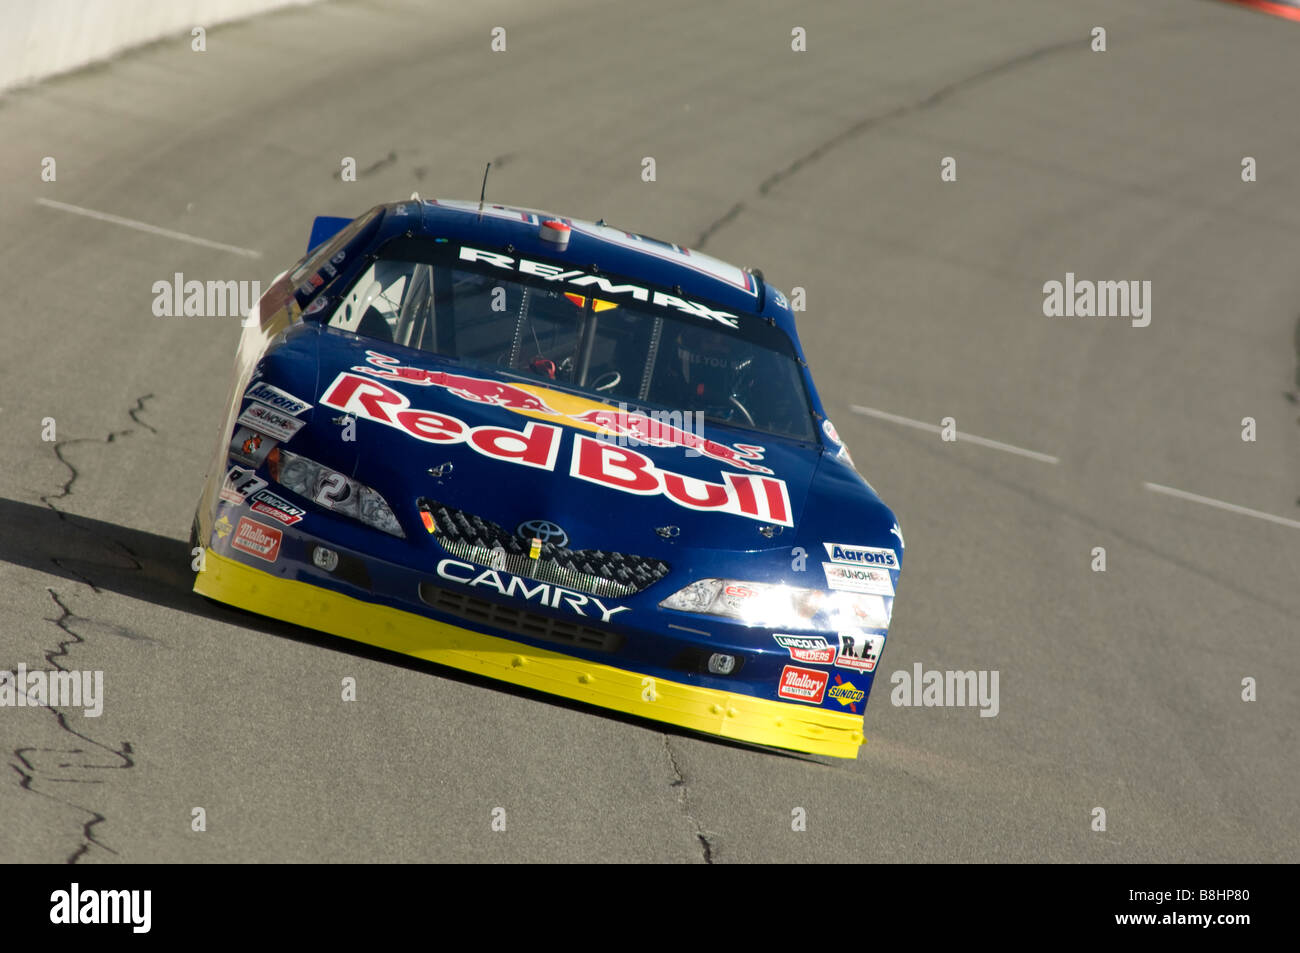 Scott Speed races the Red Bull Toyota Camry in the ARCA Re/Max race at Michigan International Speedway, 2008. Stock Photo